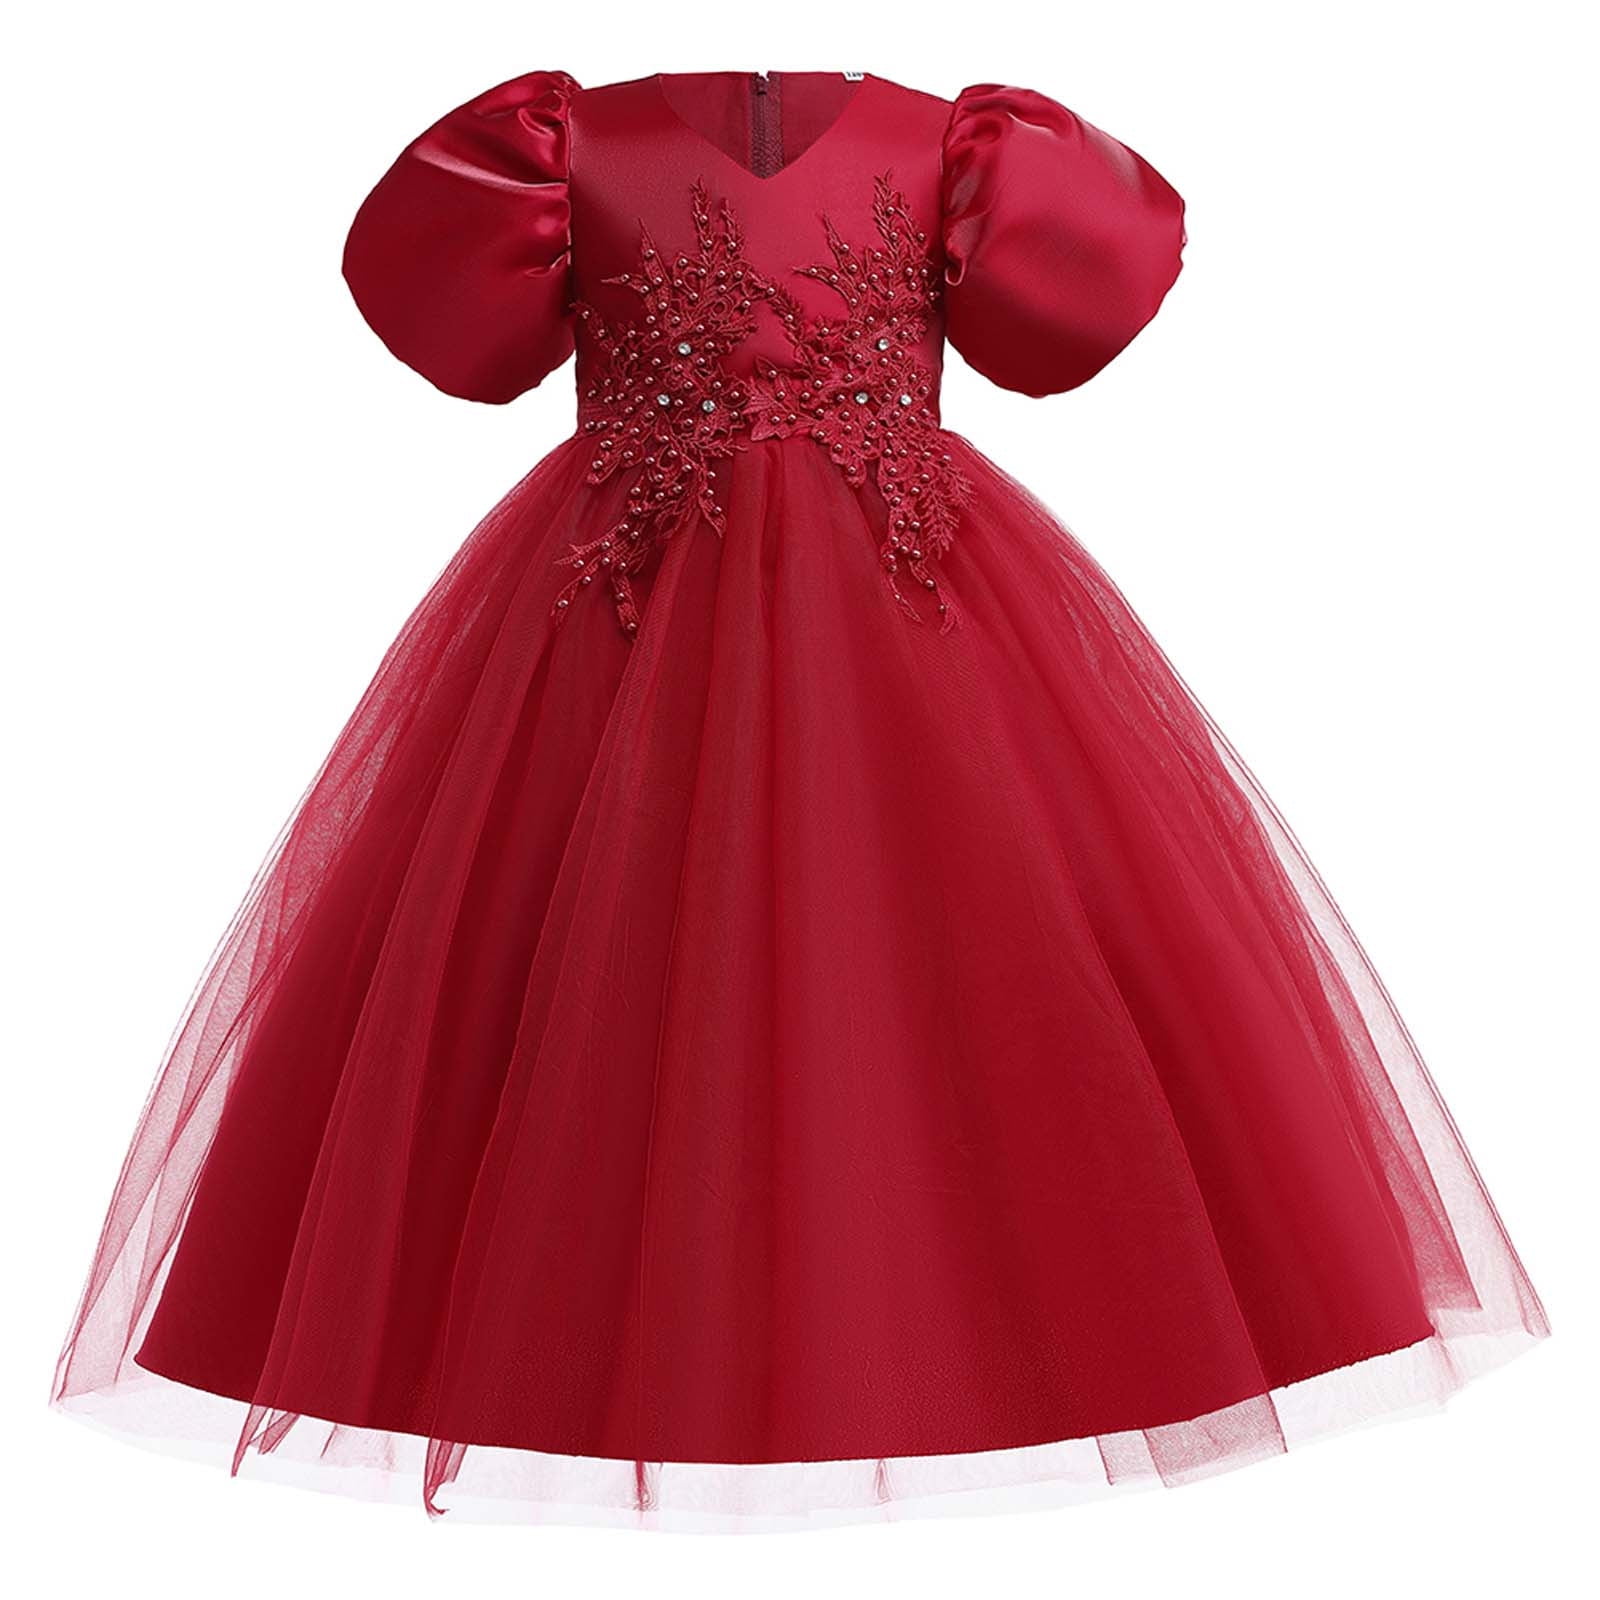 Kids Fancy GOwn Collection. at Rs.1400/Pcs in surat offer by Khushbu Fashion